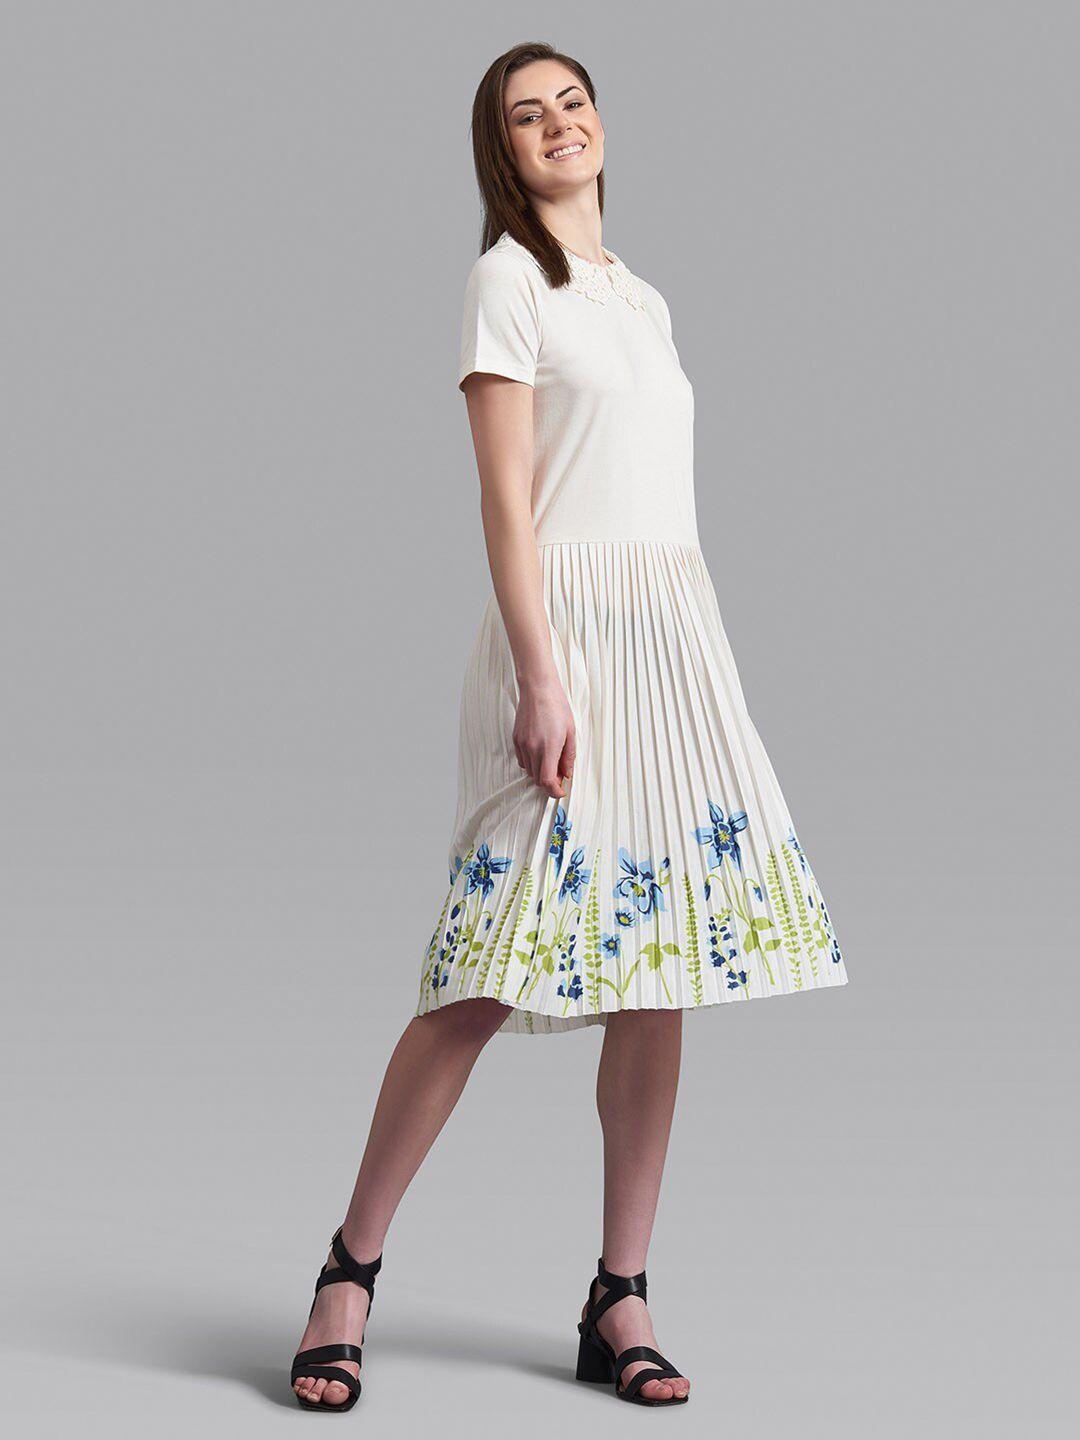 beverly-hills-polo-club-off-white-floral-accordian-pleats-dress